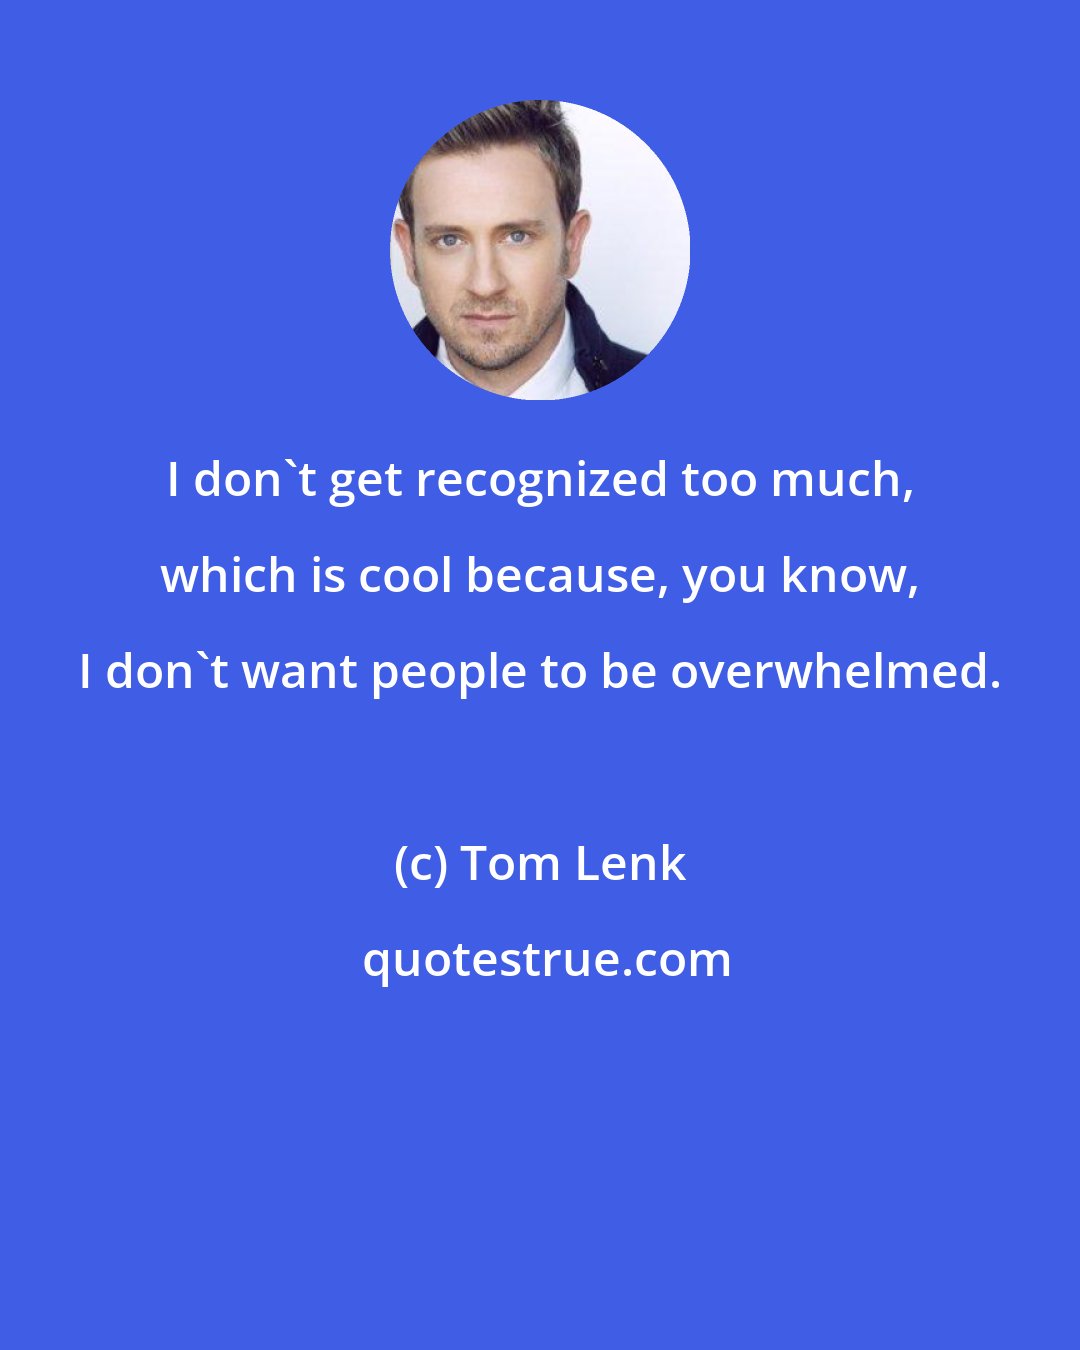 Tom Lenk: I don't get recognized too much, which is cool because, you know, I don't want people to be overwhelmed.